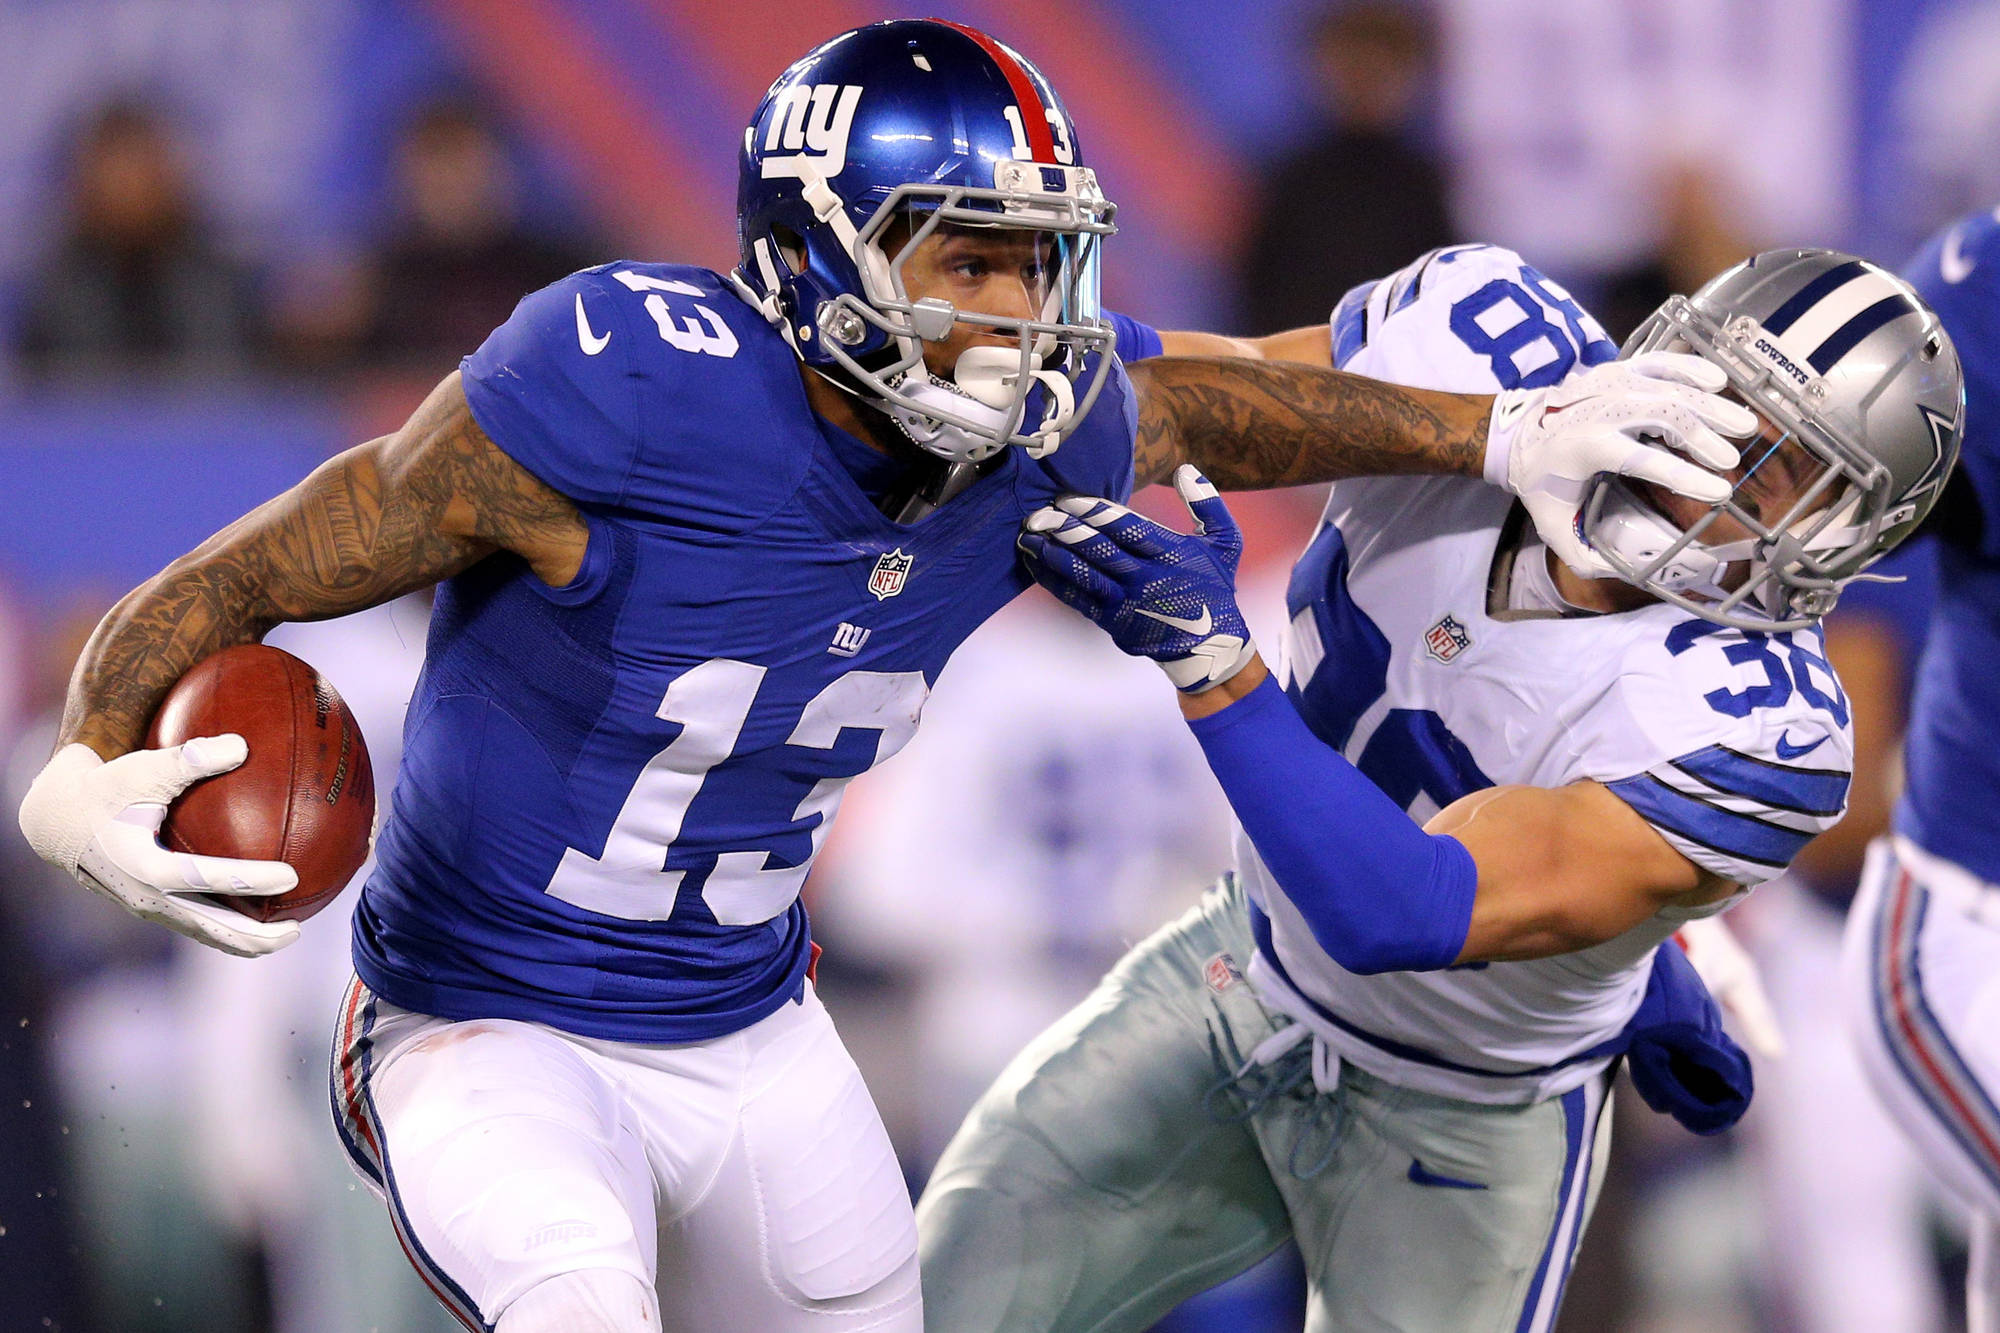 Giants Hand Cowboys Their Only Two Losses